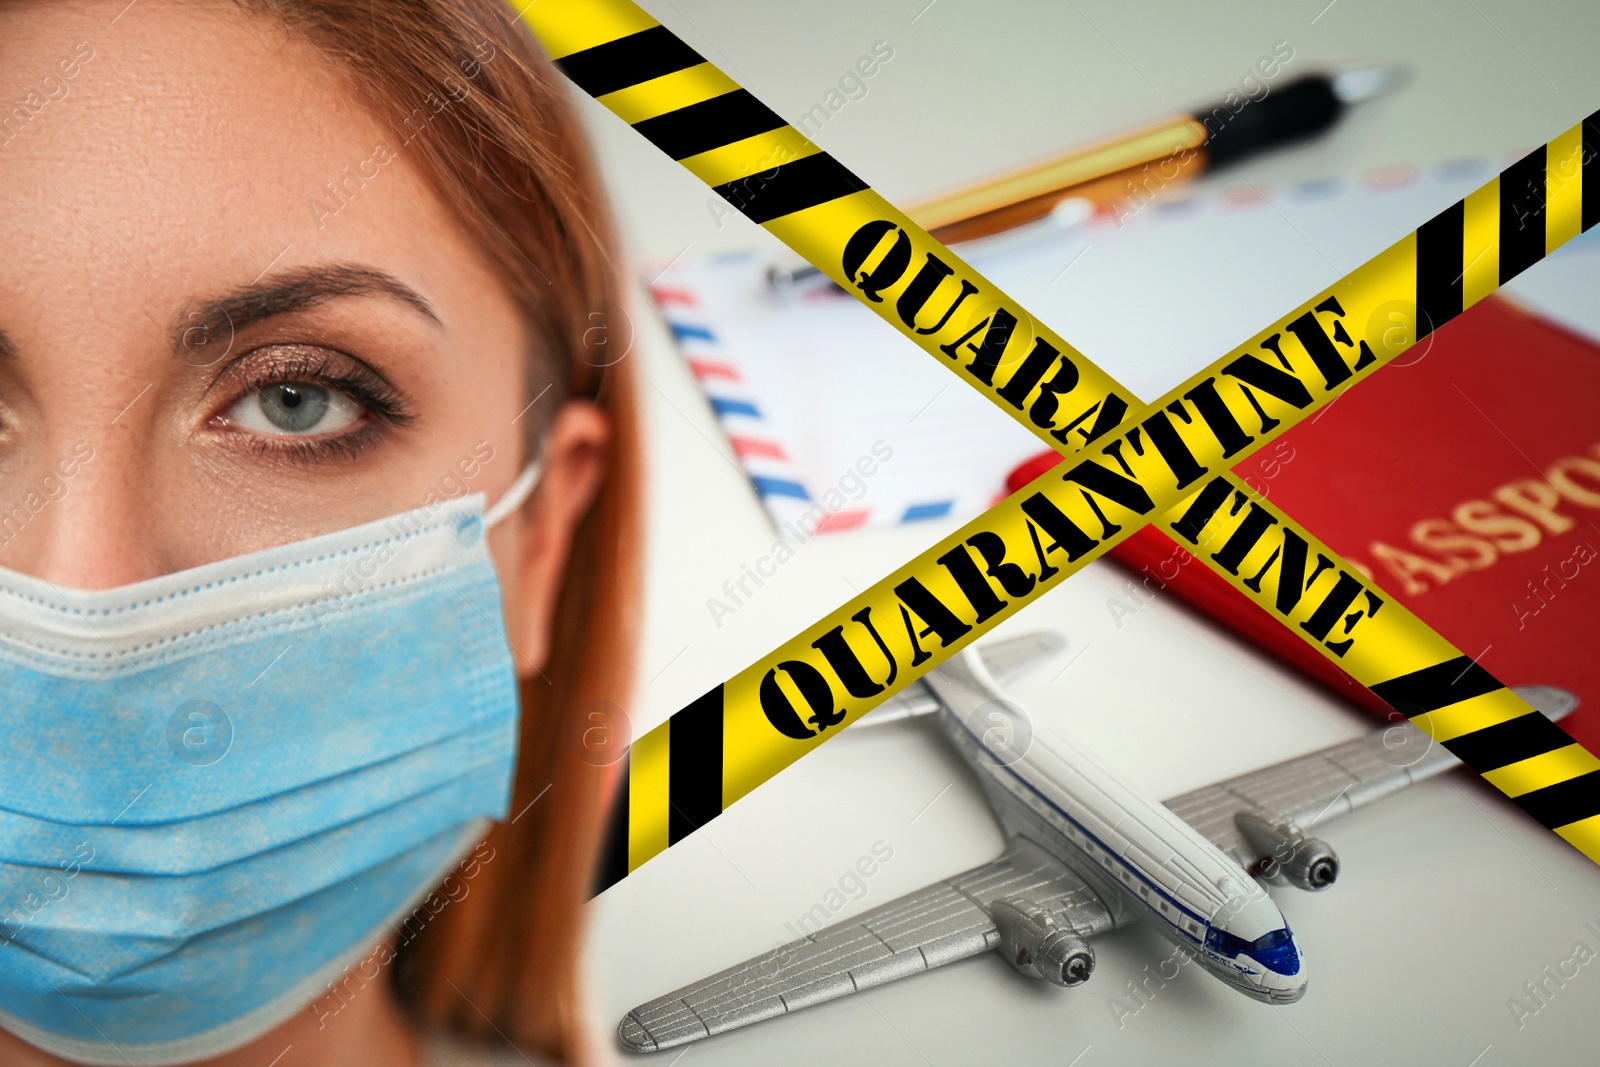 Image of Stop travelling during coronavirus quarantine. Woman with medical mask and yellow awareness ribbons